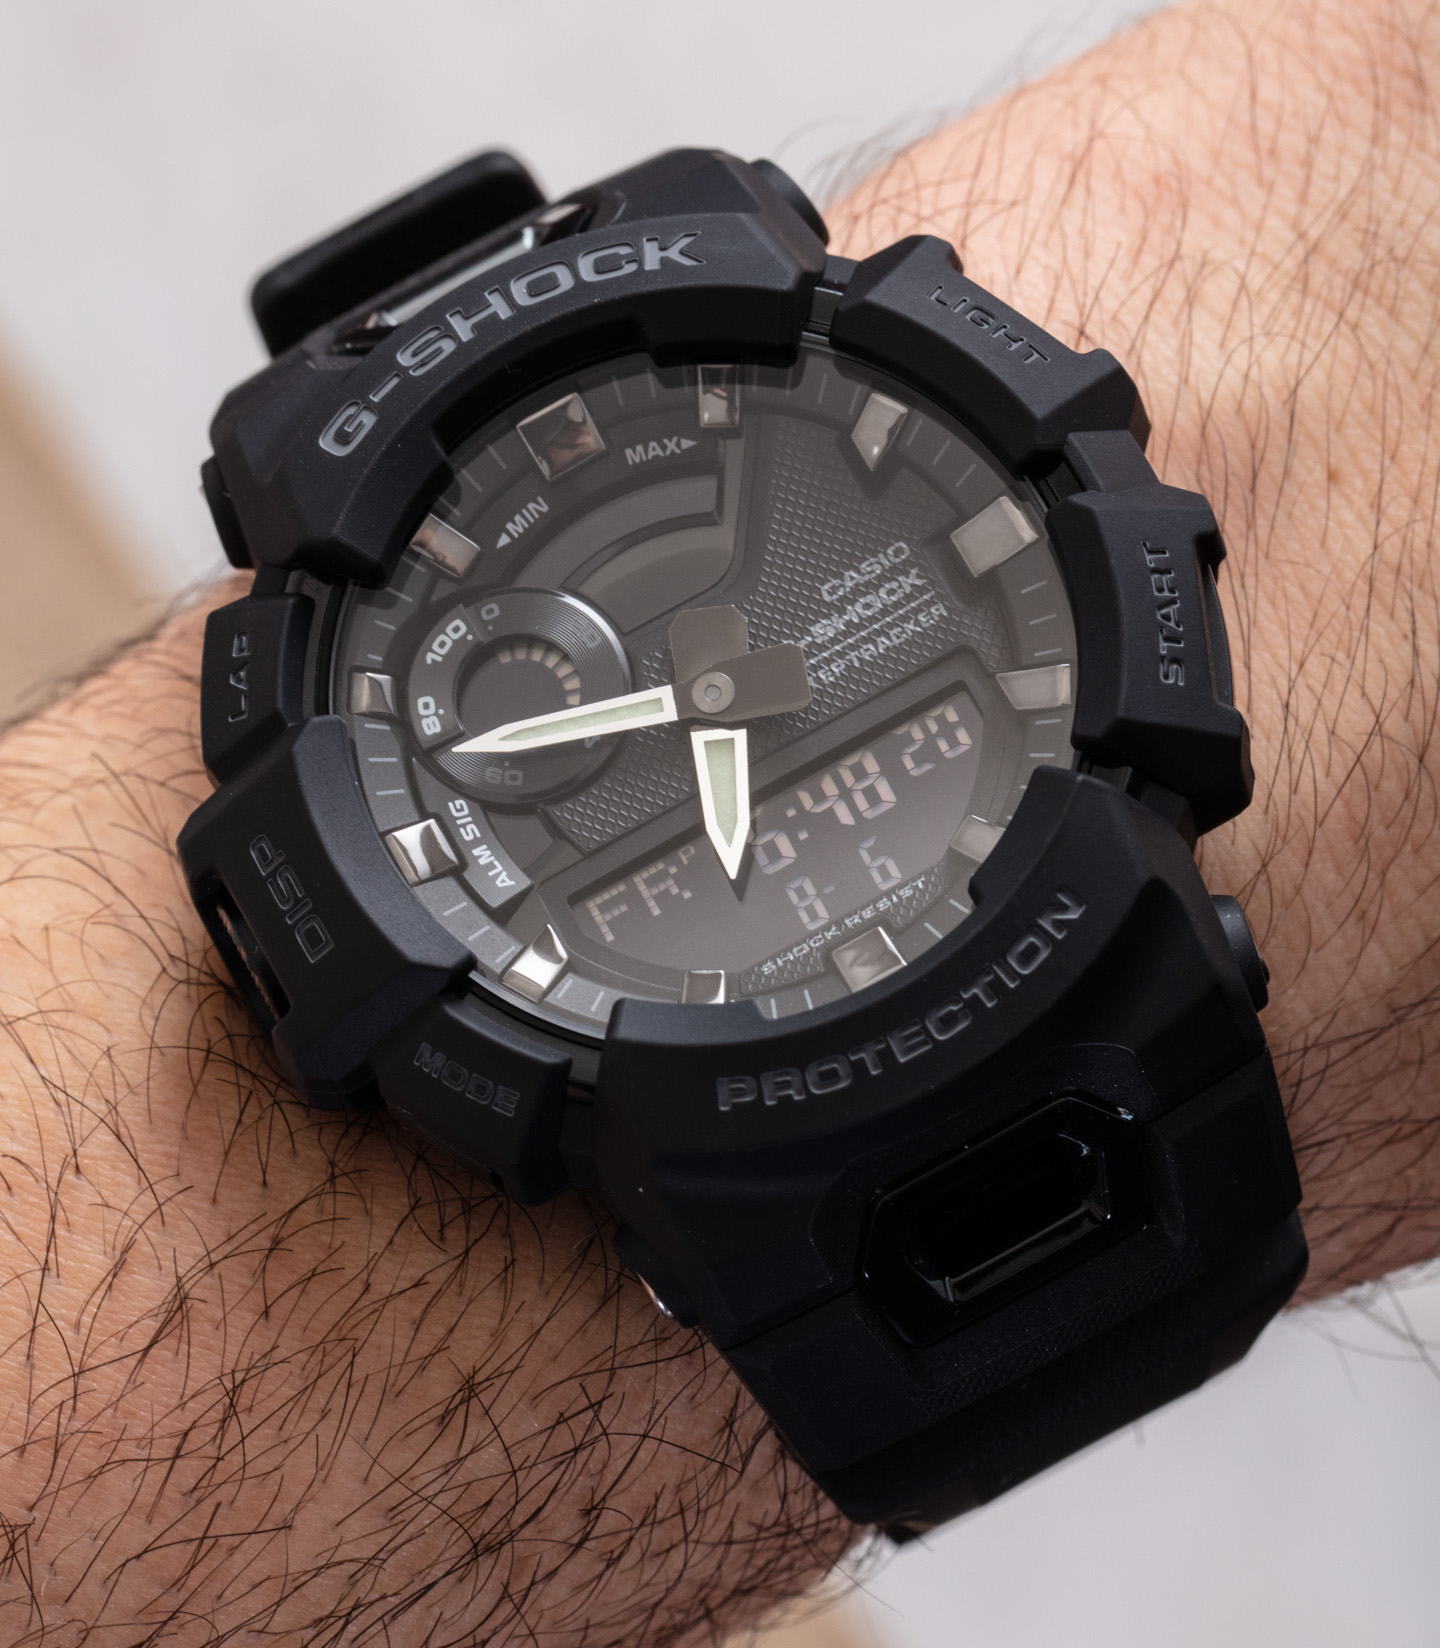 POWER G-Shock | TRAINER Watches GBA900 Casio Hands-On: aBlogtoWatch